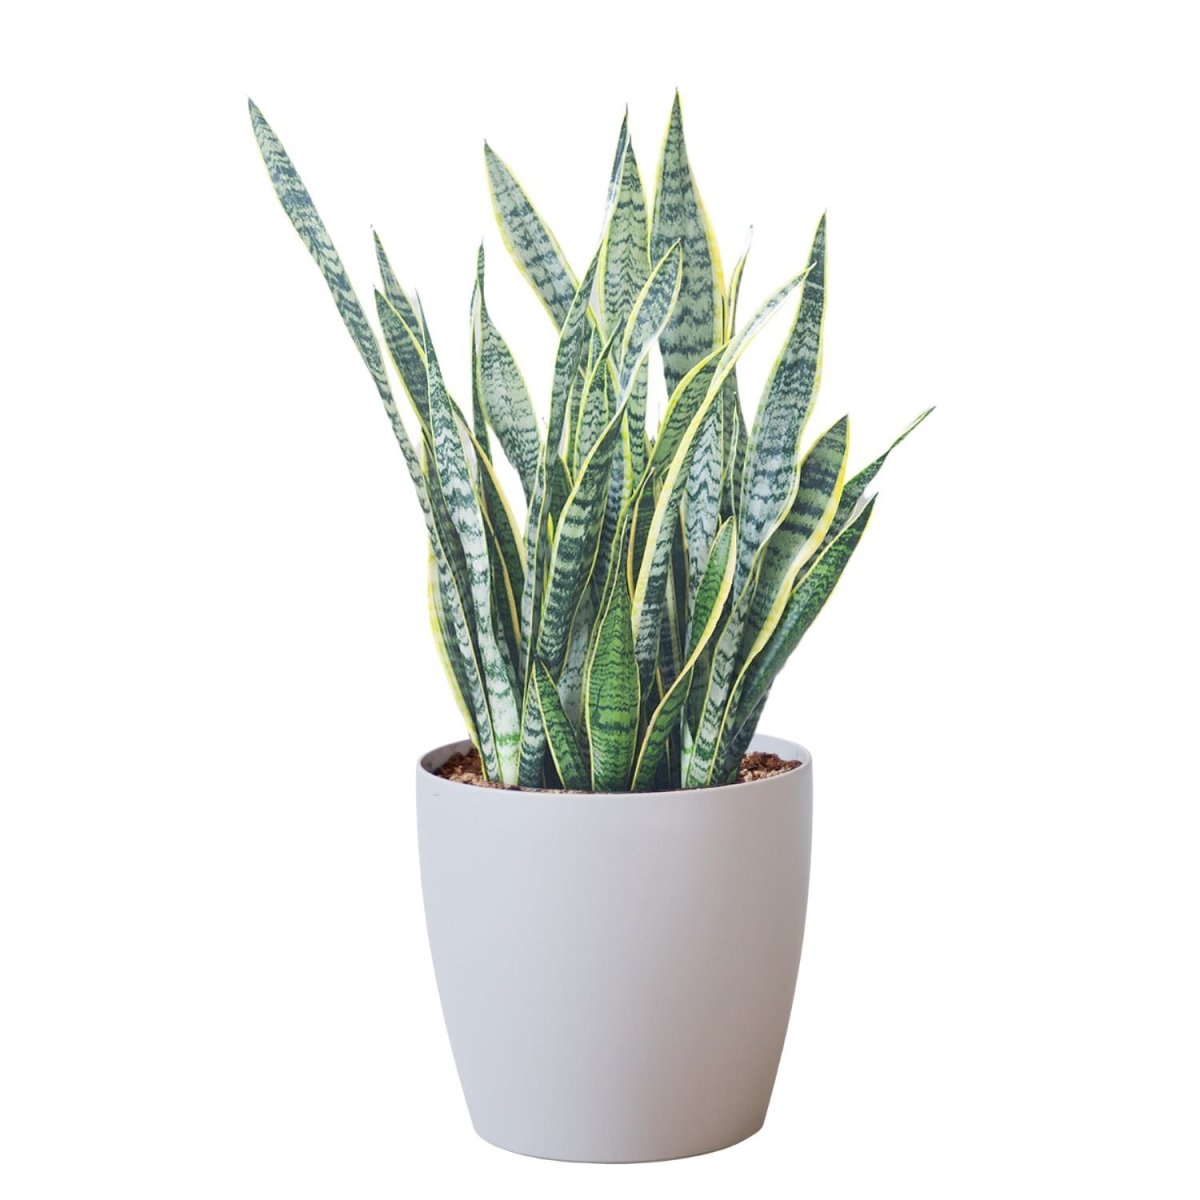 Sansevieria Potted In Lechuza Classico Trend Planter - Sand Brown - My City Plants